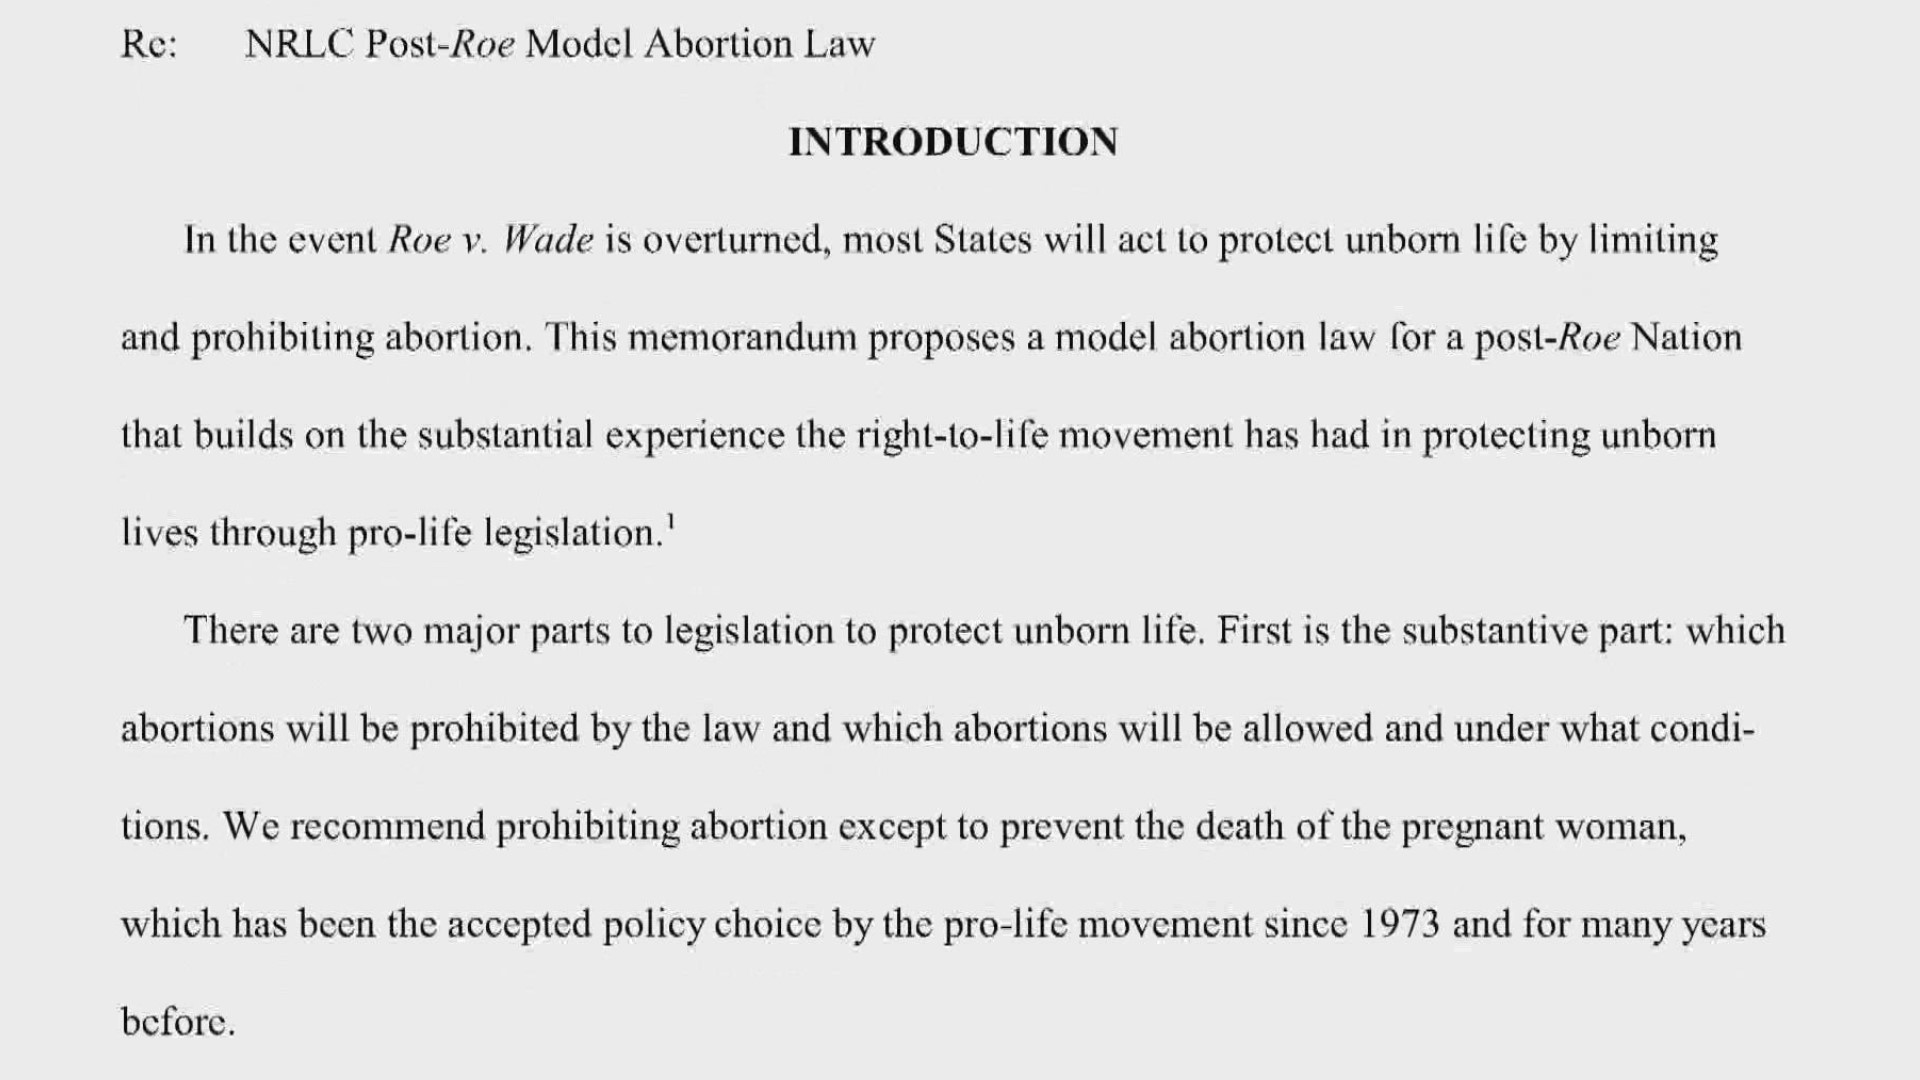 A proposal outlines what the National Right to Life Committee believes should be included in abortion laws.